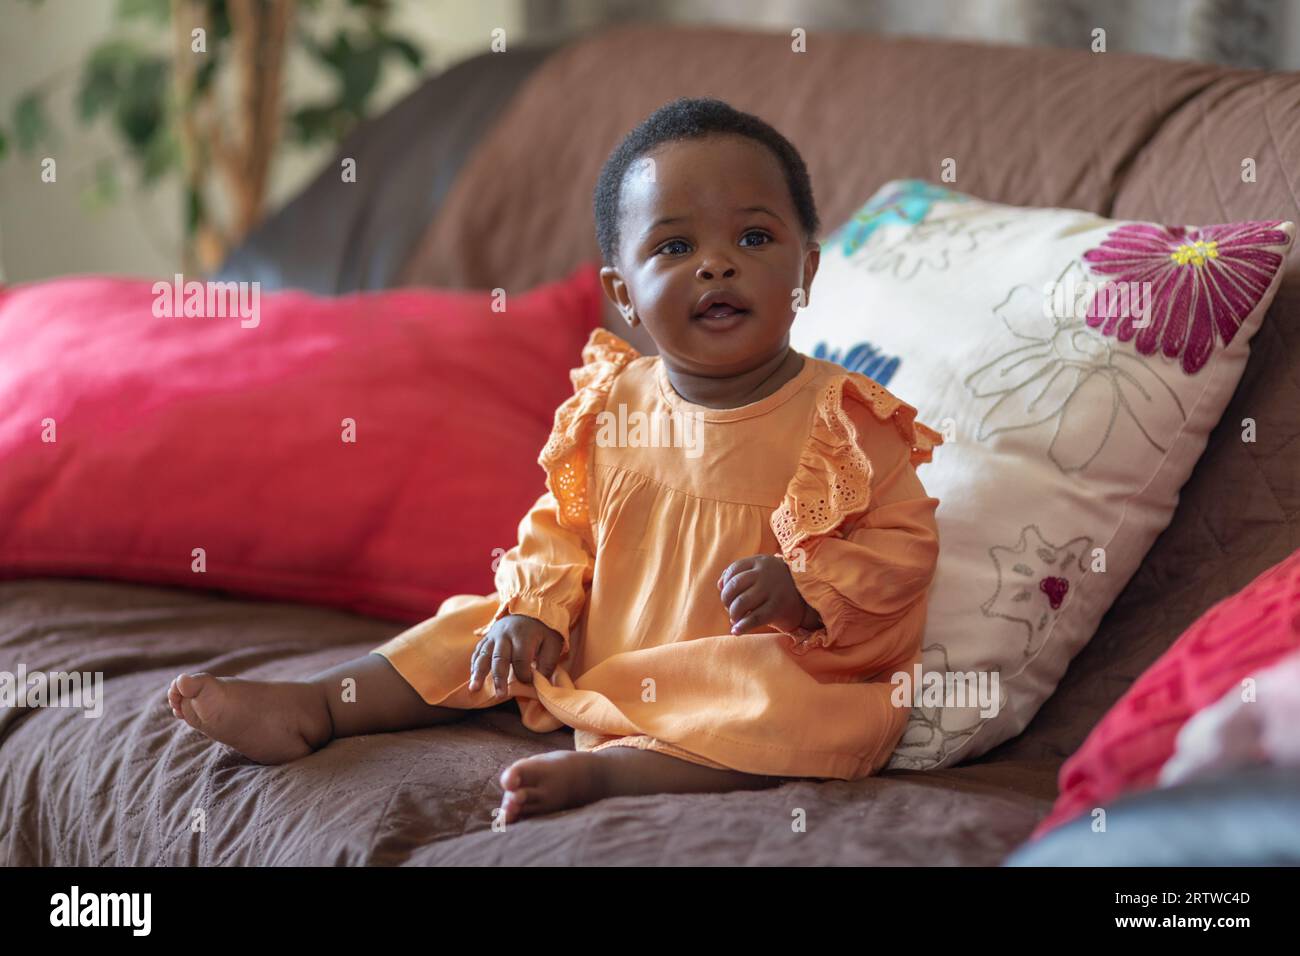 Portrait of a smiling black baby girl dressed in an orange dress sitting on a couch Stock Photo